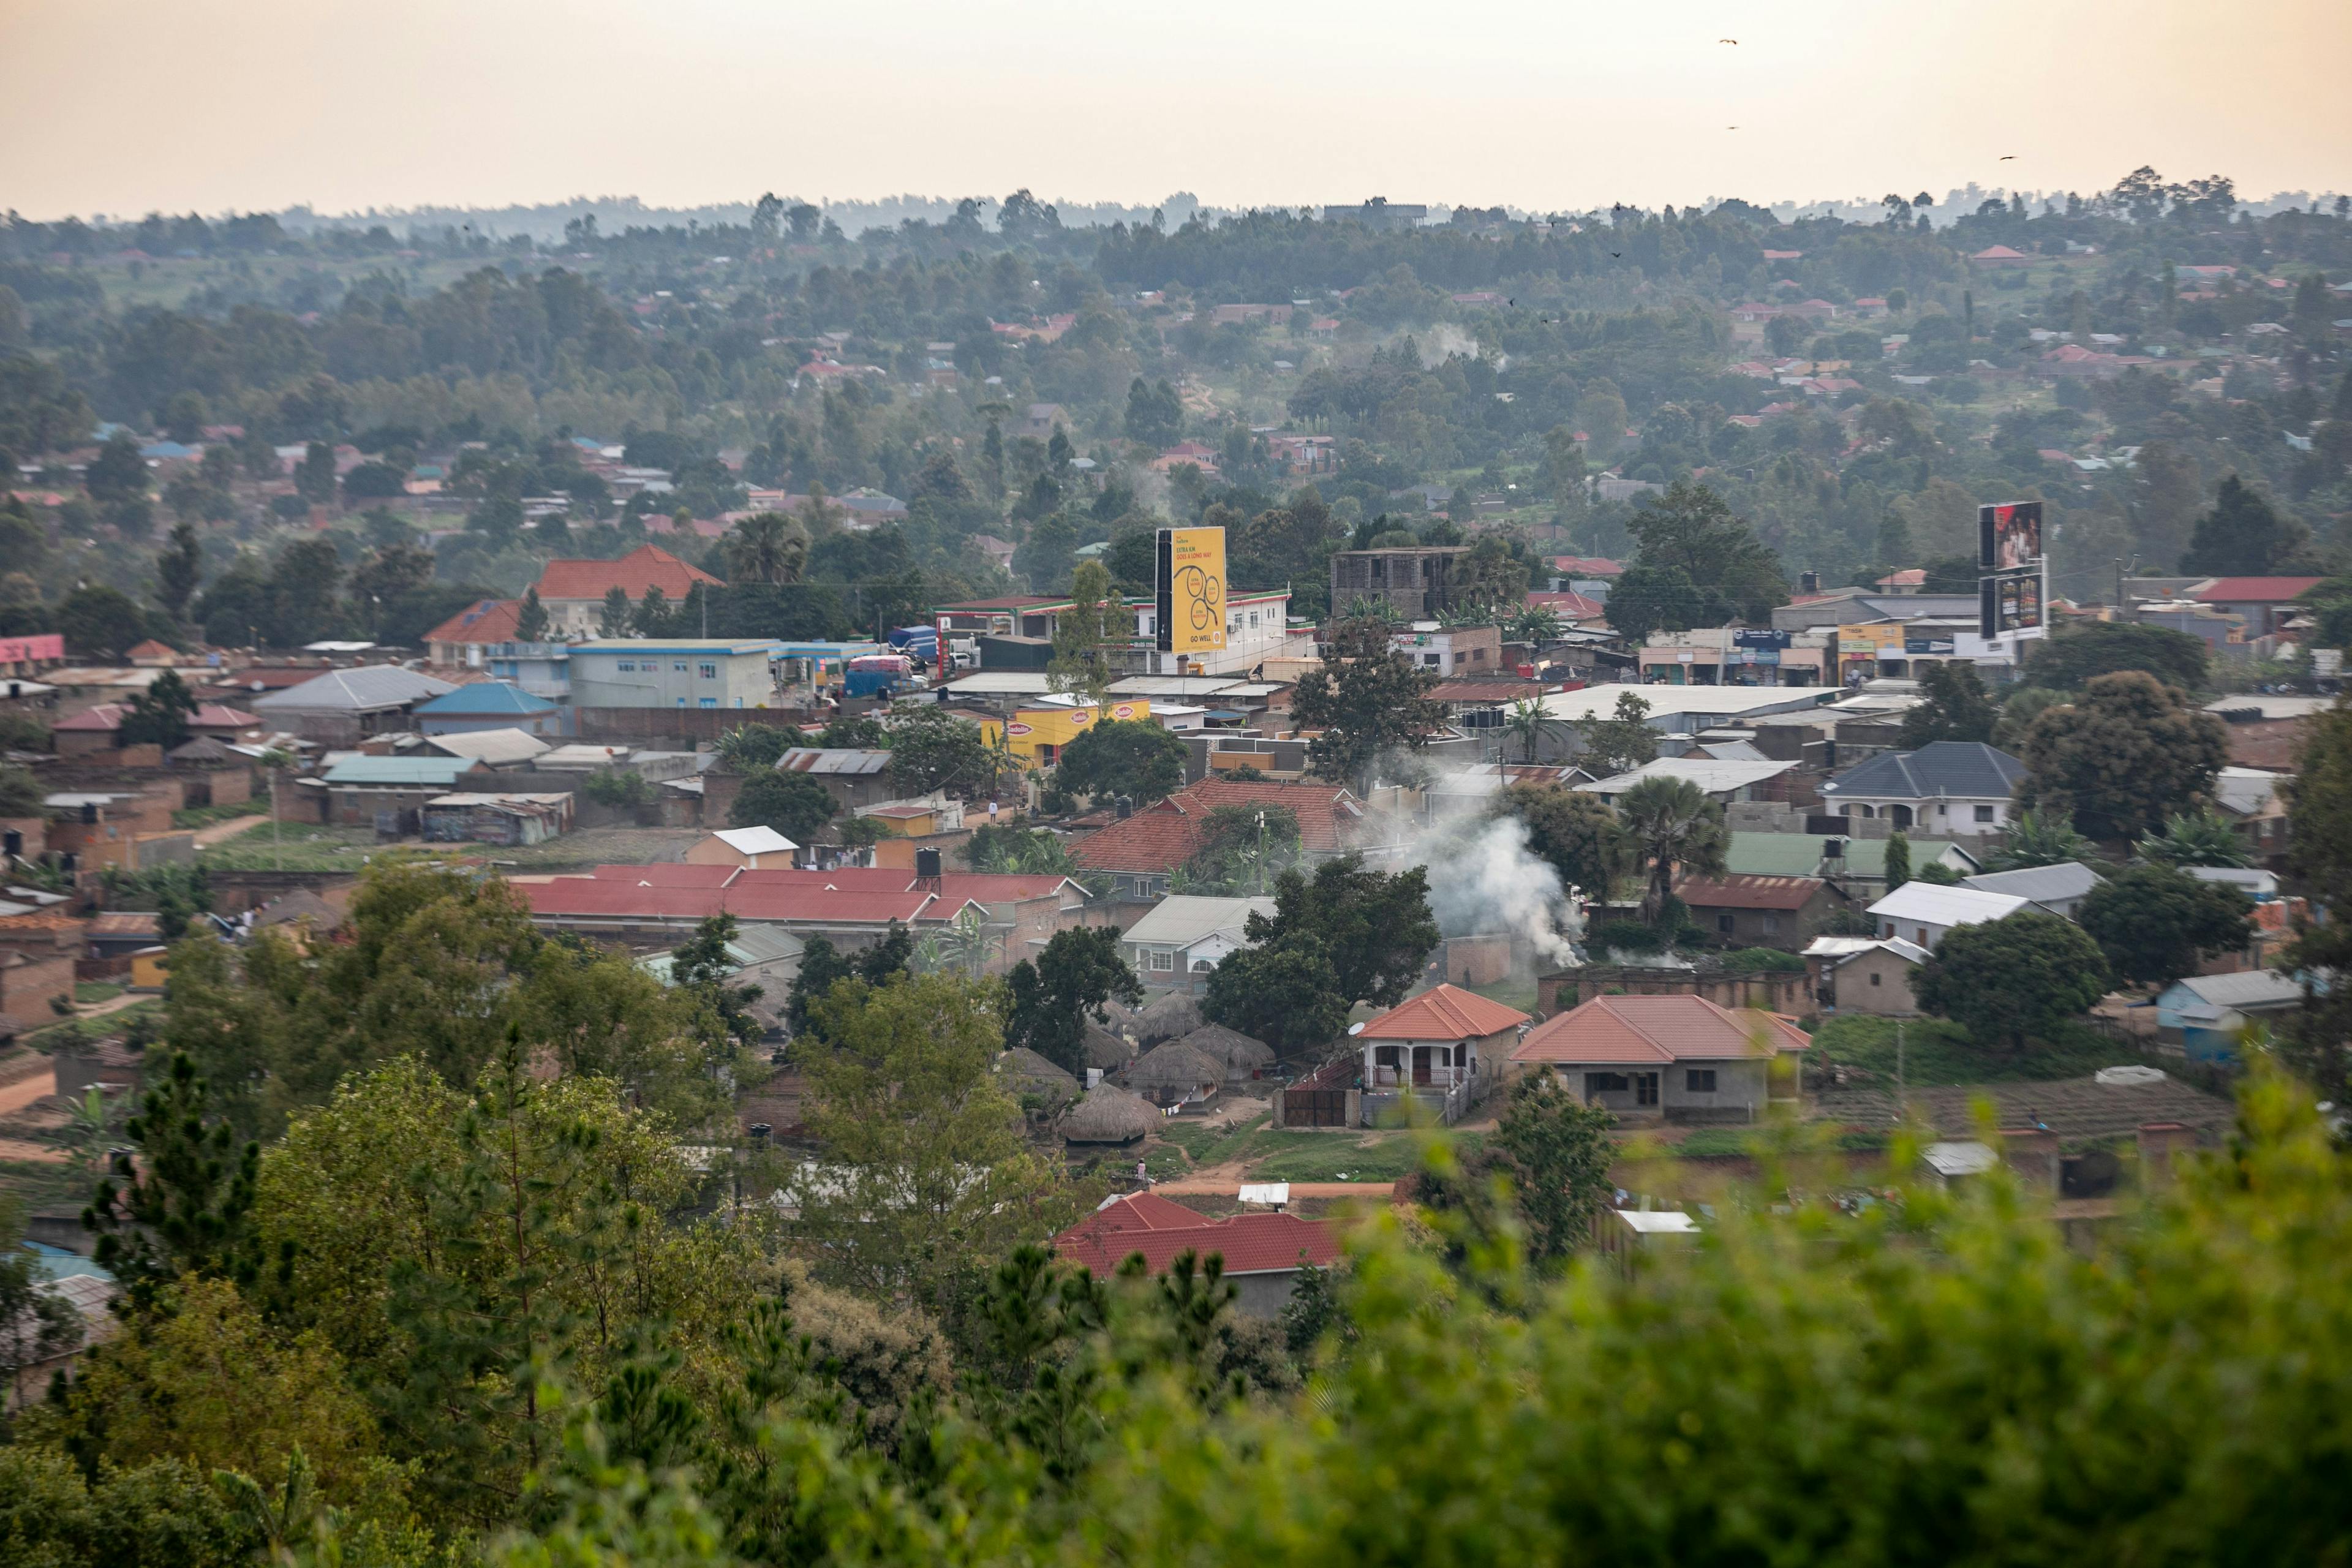 The city is close to Uganda’s borders with South Sudan and the Democratic Republic of Congo (DRC). It is one of many border communities on the continent that could see big population shifts as people move in response to climate impacts.